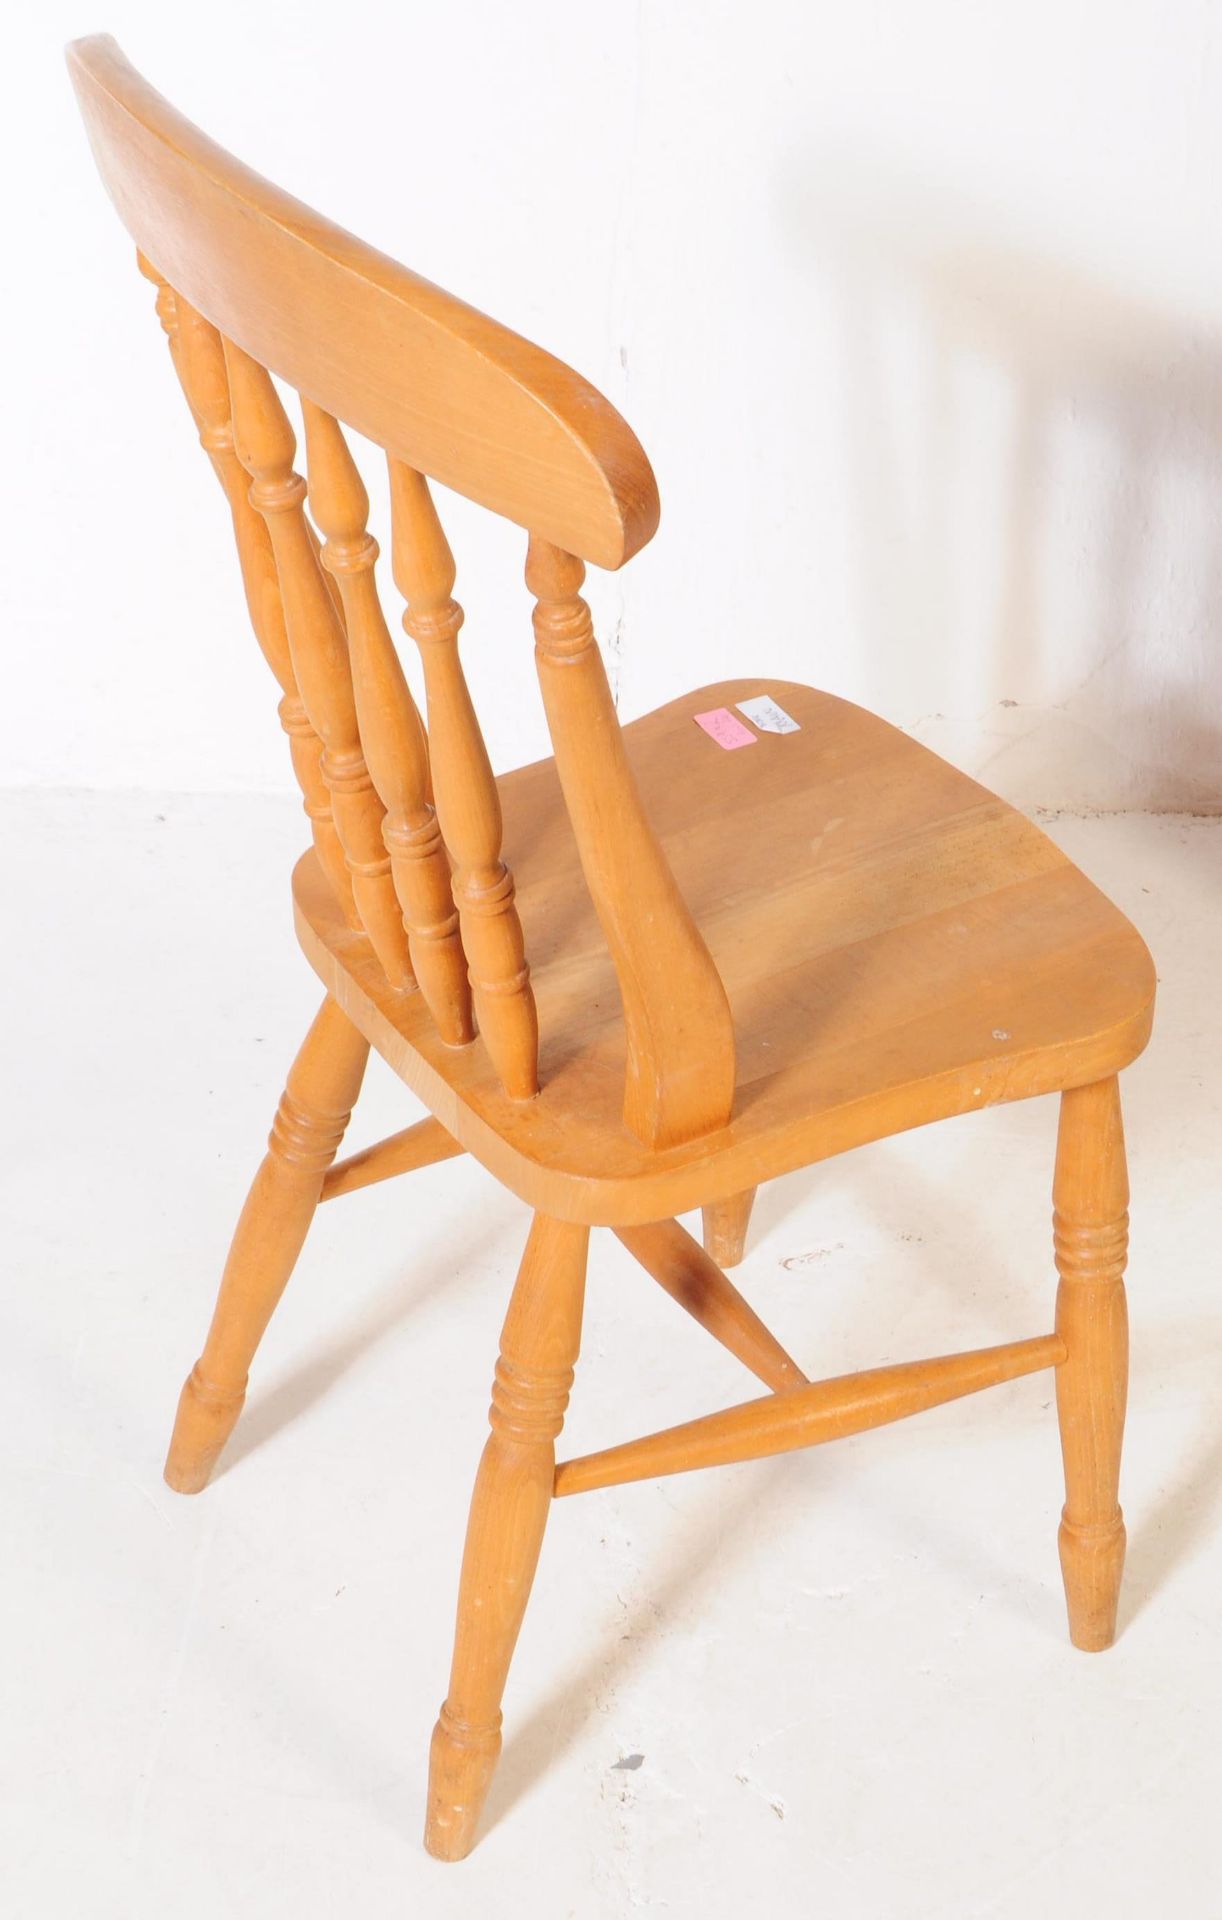 CONTEMPORARY PINE FARMHOUSE KITCHEN CHAIR W/ SIDE TABLE - Image 6 of 7